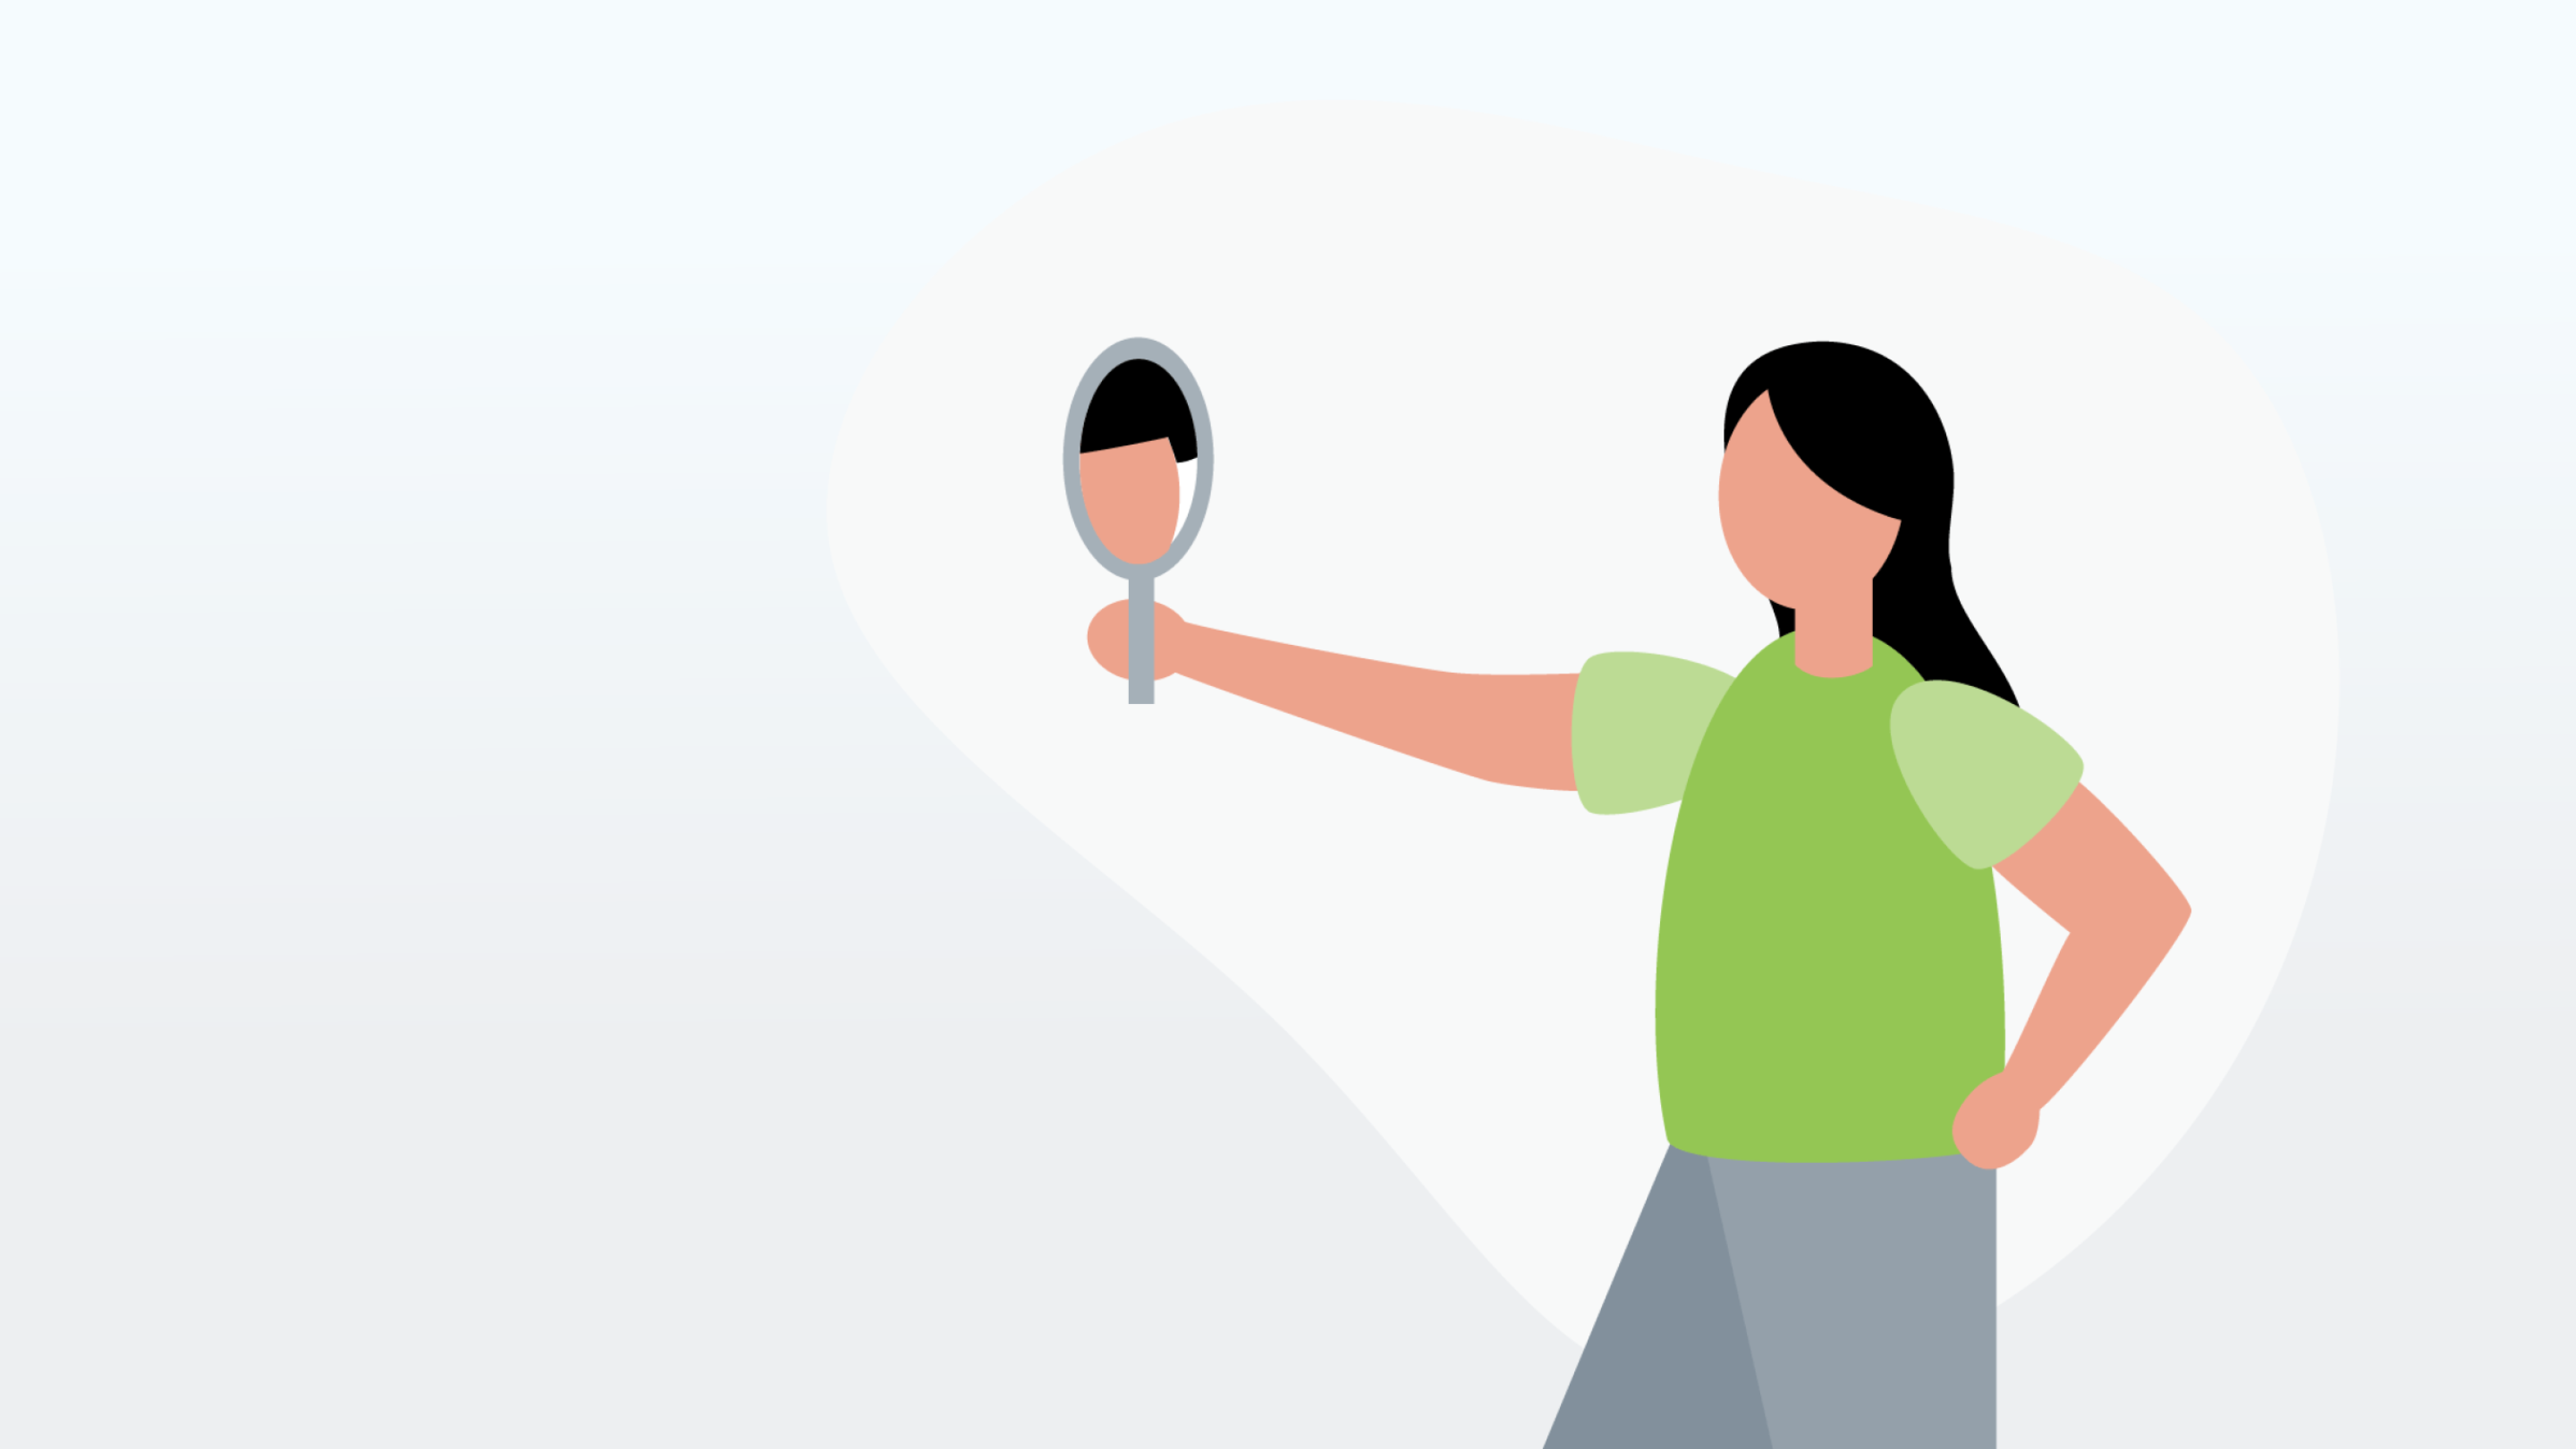 Colourful graphic of a person holding up a mirror to themselves.